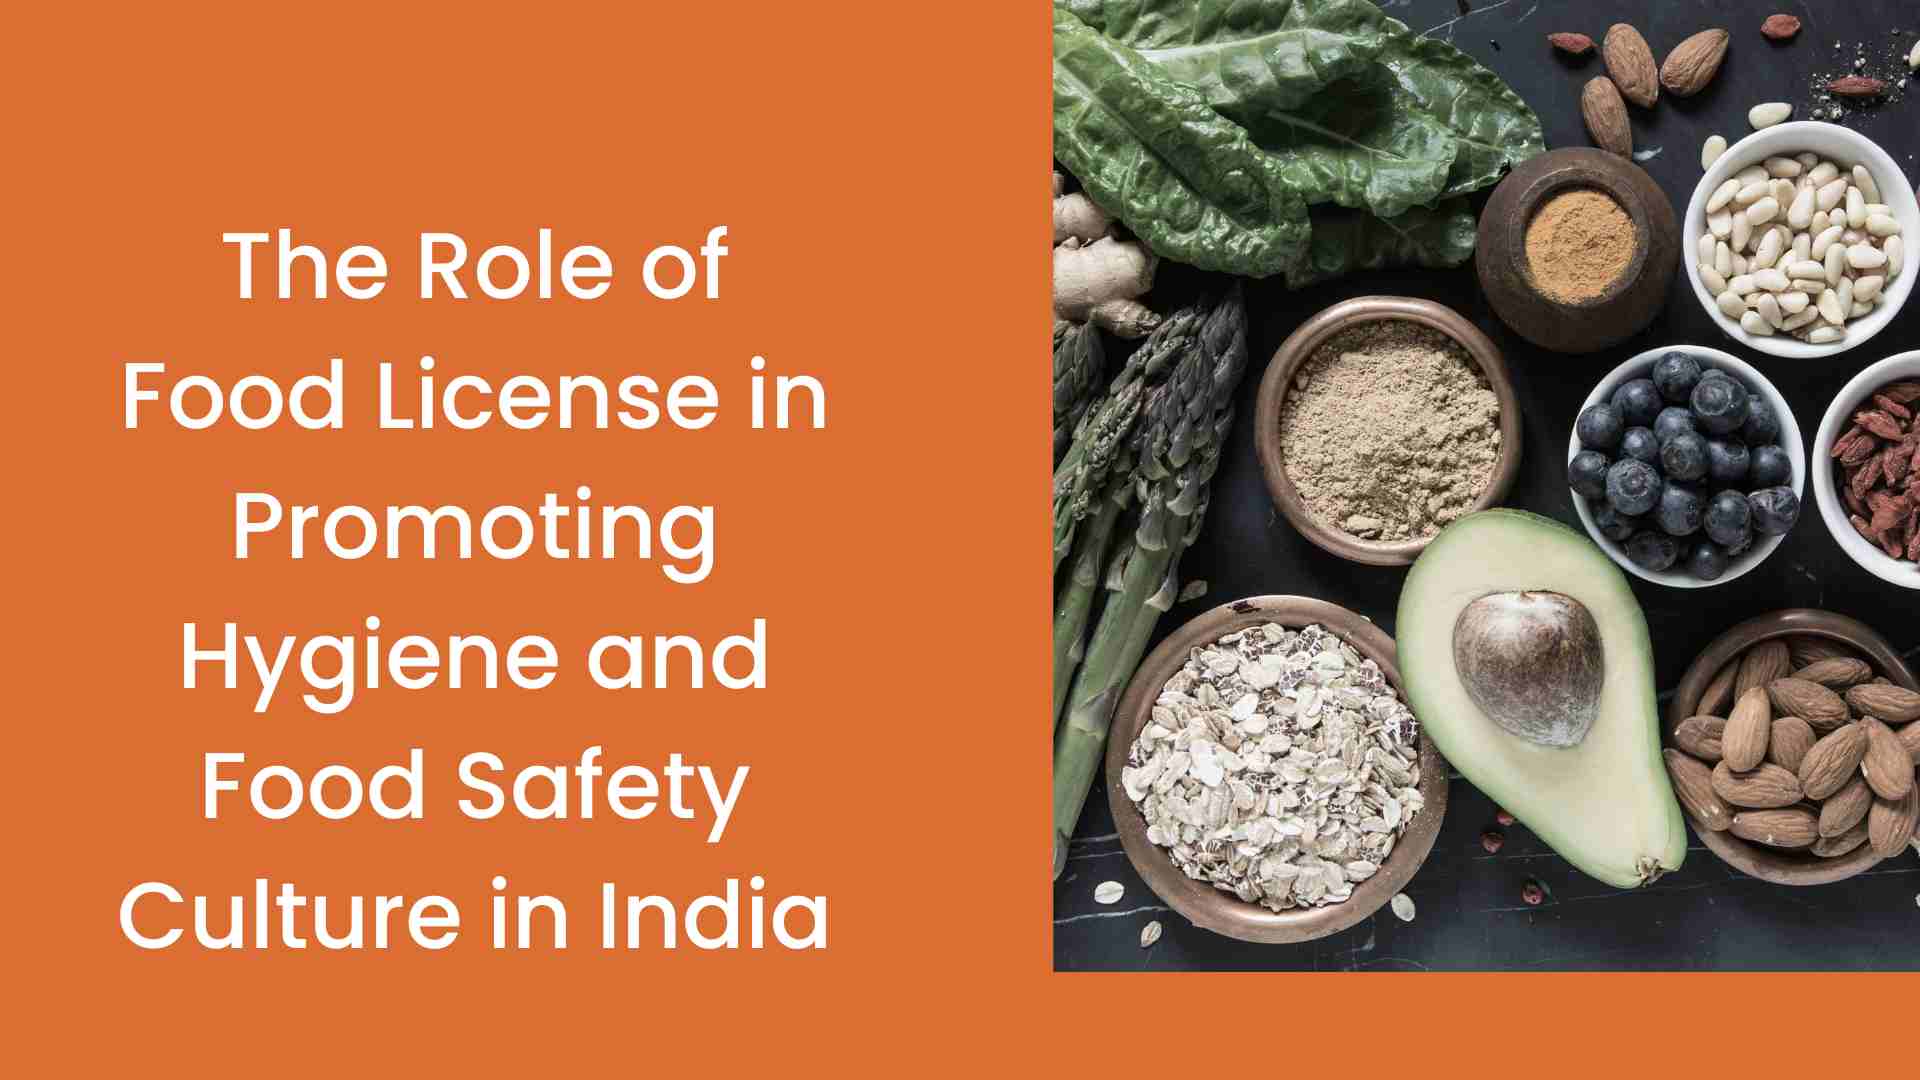 The Role of Food License in Promoting Hygiene and Food Safety Culture in India